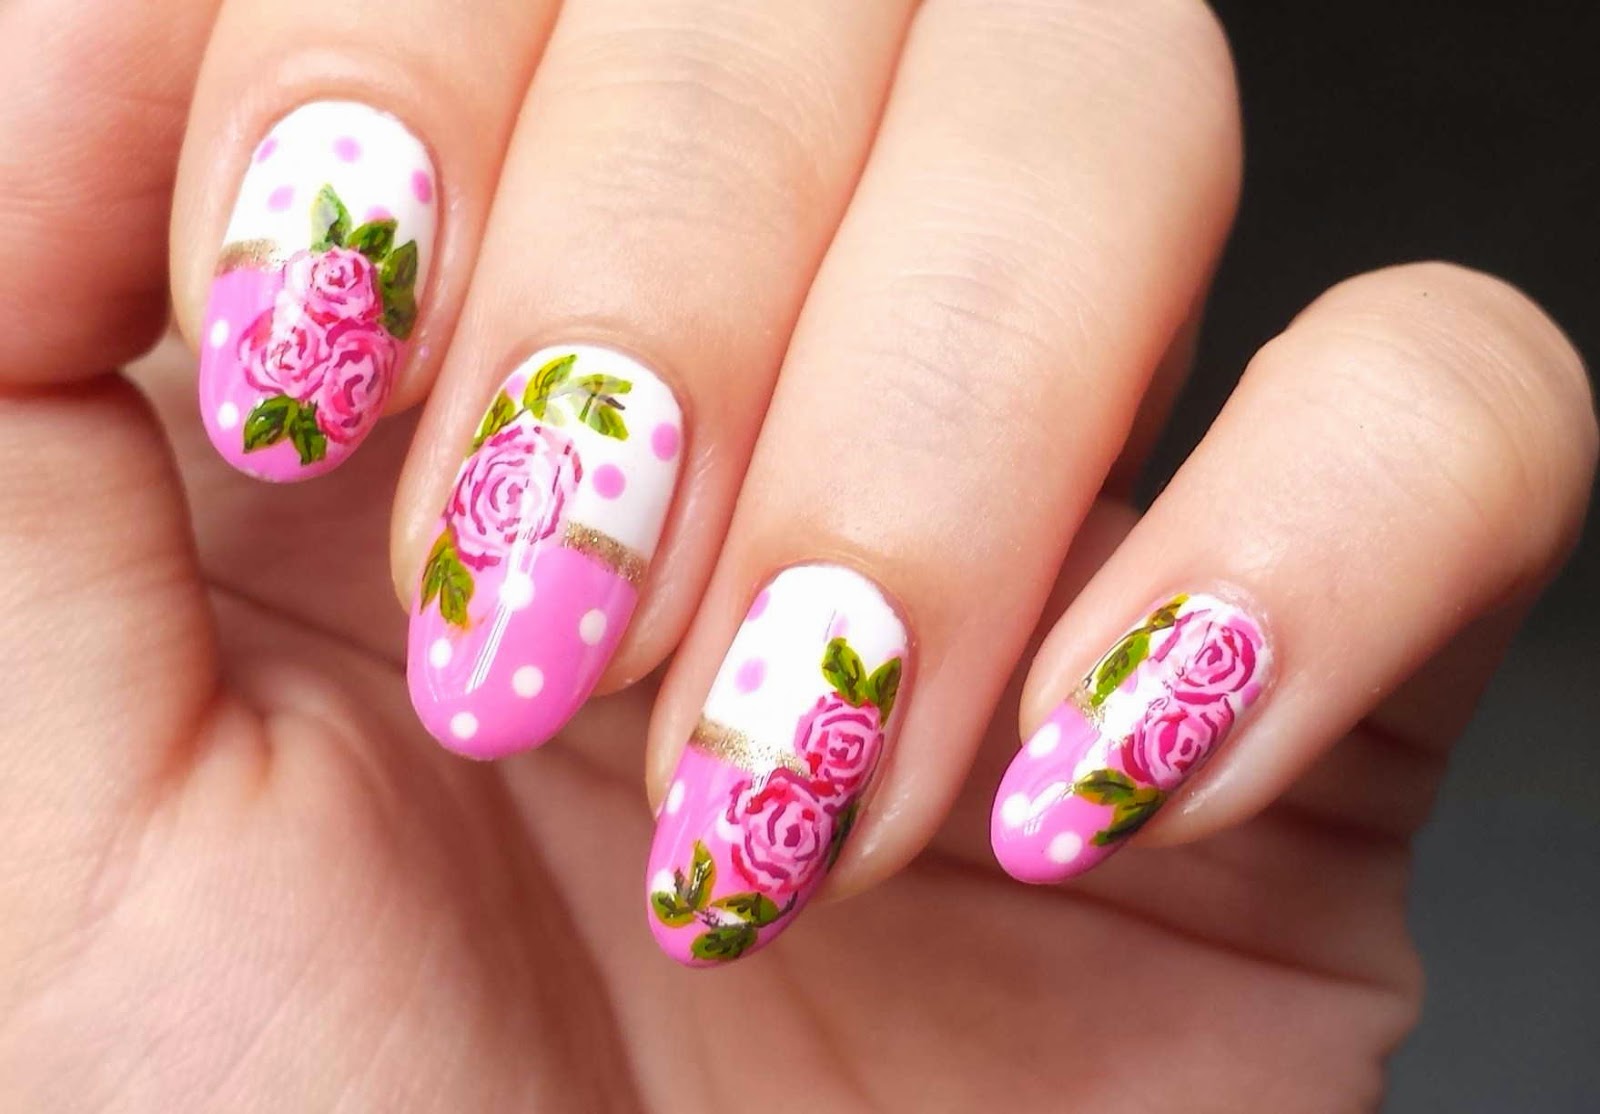 Step by Step Guide to Creating Rose Nail Art - wide 4